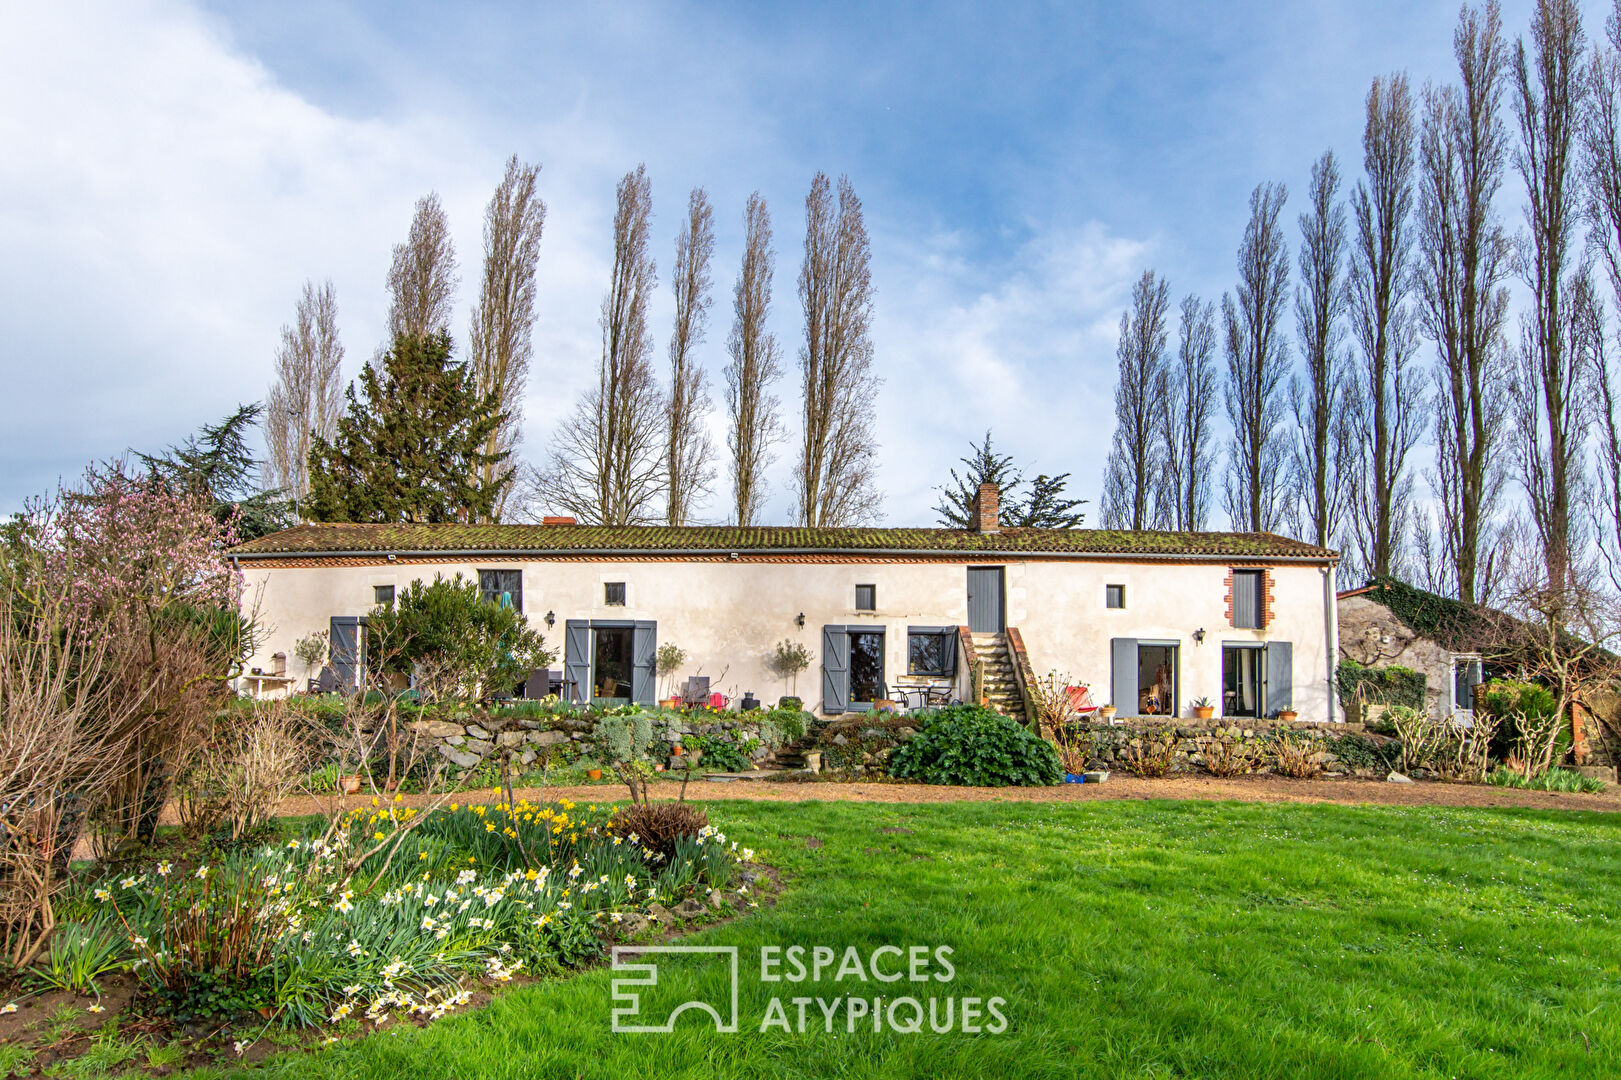 18th century farmhouse with exceptional view of the Loire